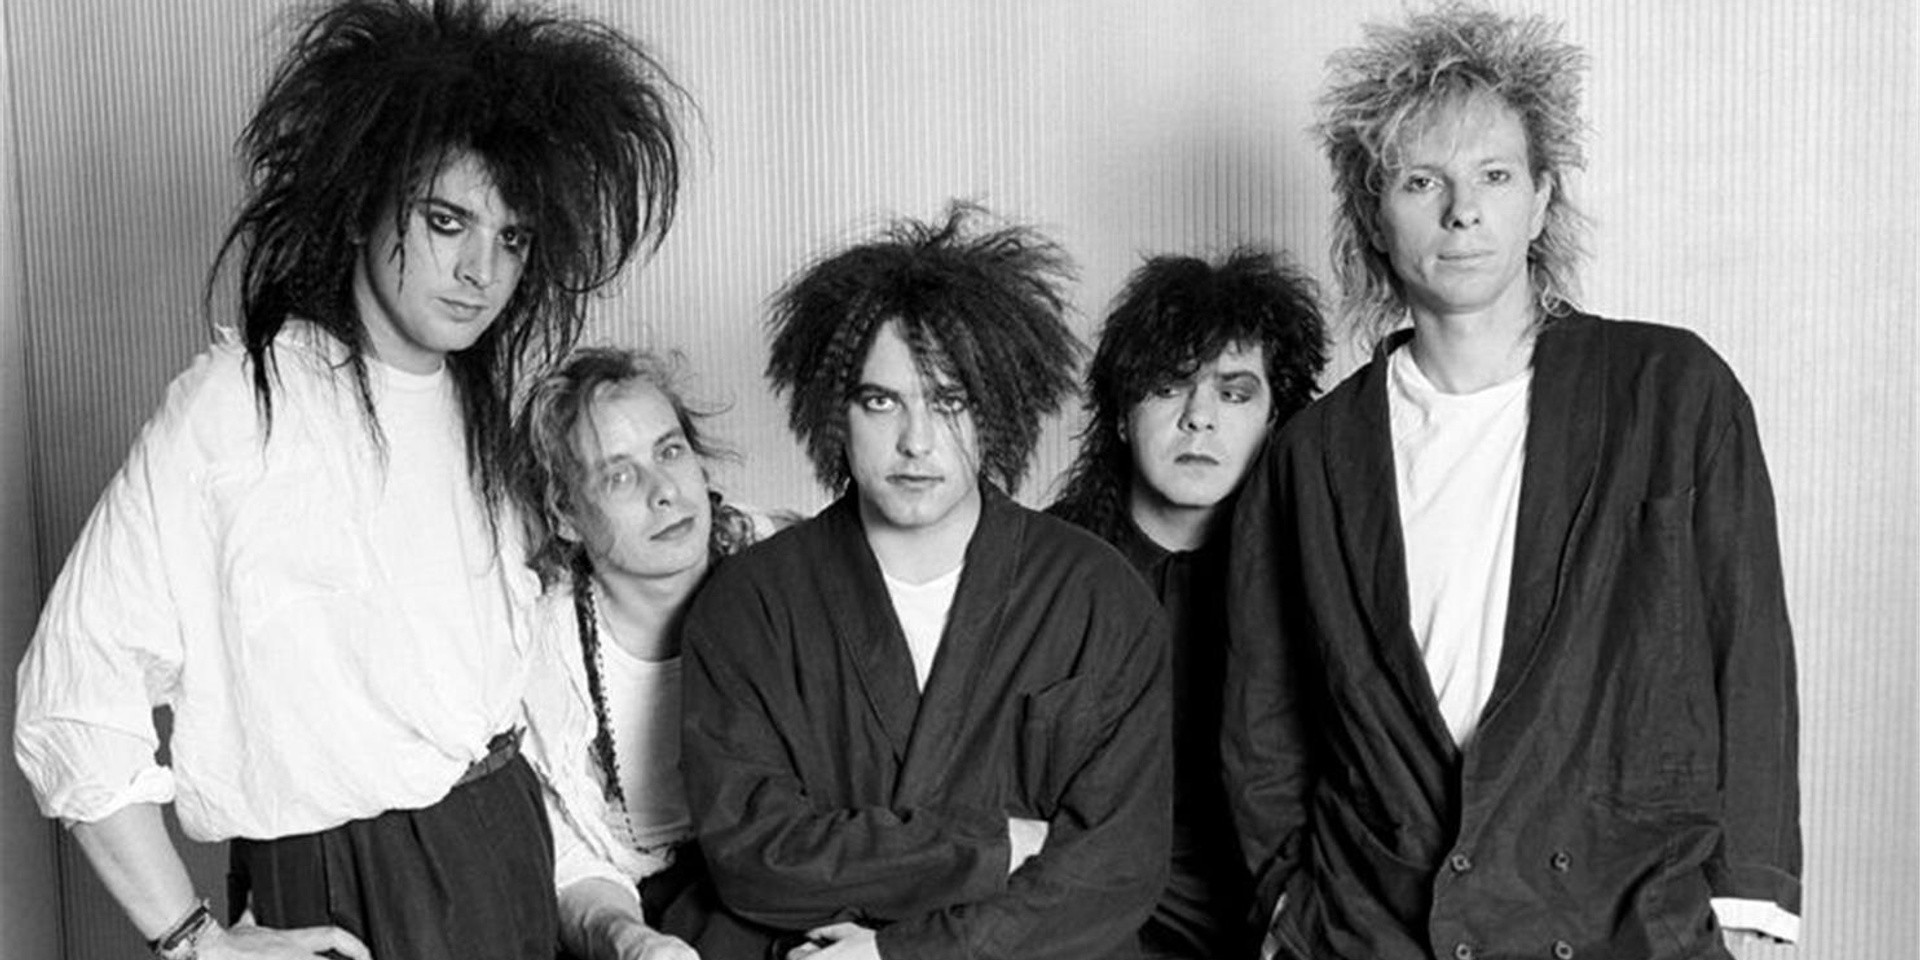 The Projector to screen The Cure's 40th anniversary Hyde Park concert this July 